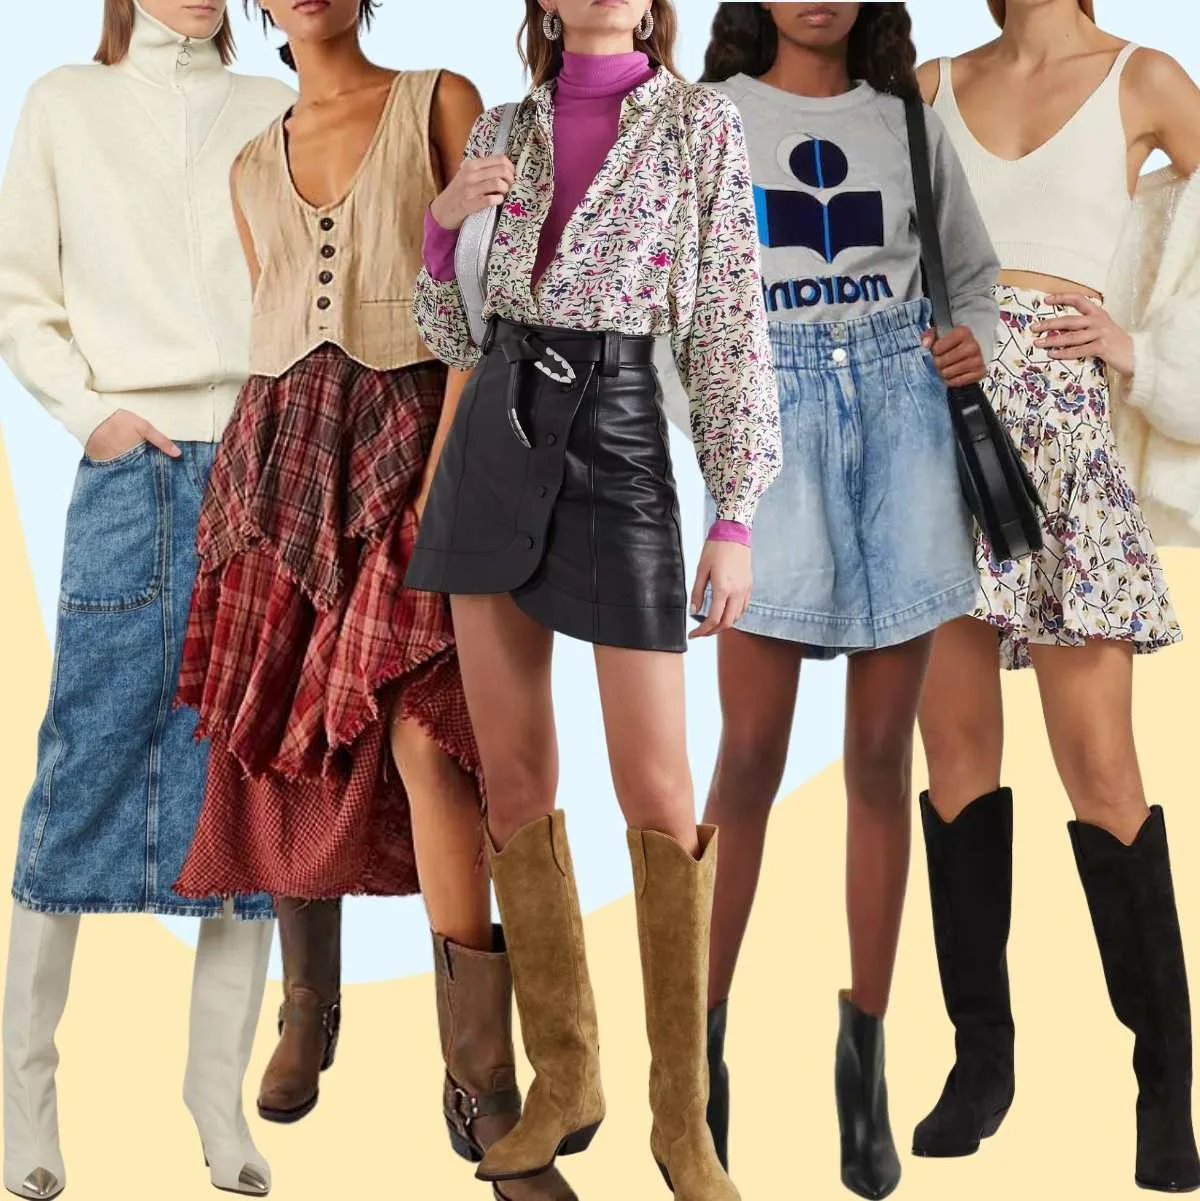 Collage of 5 women wearing different cowboy boots outfits with skirts.